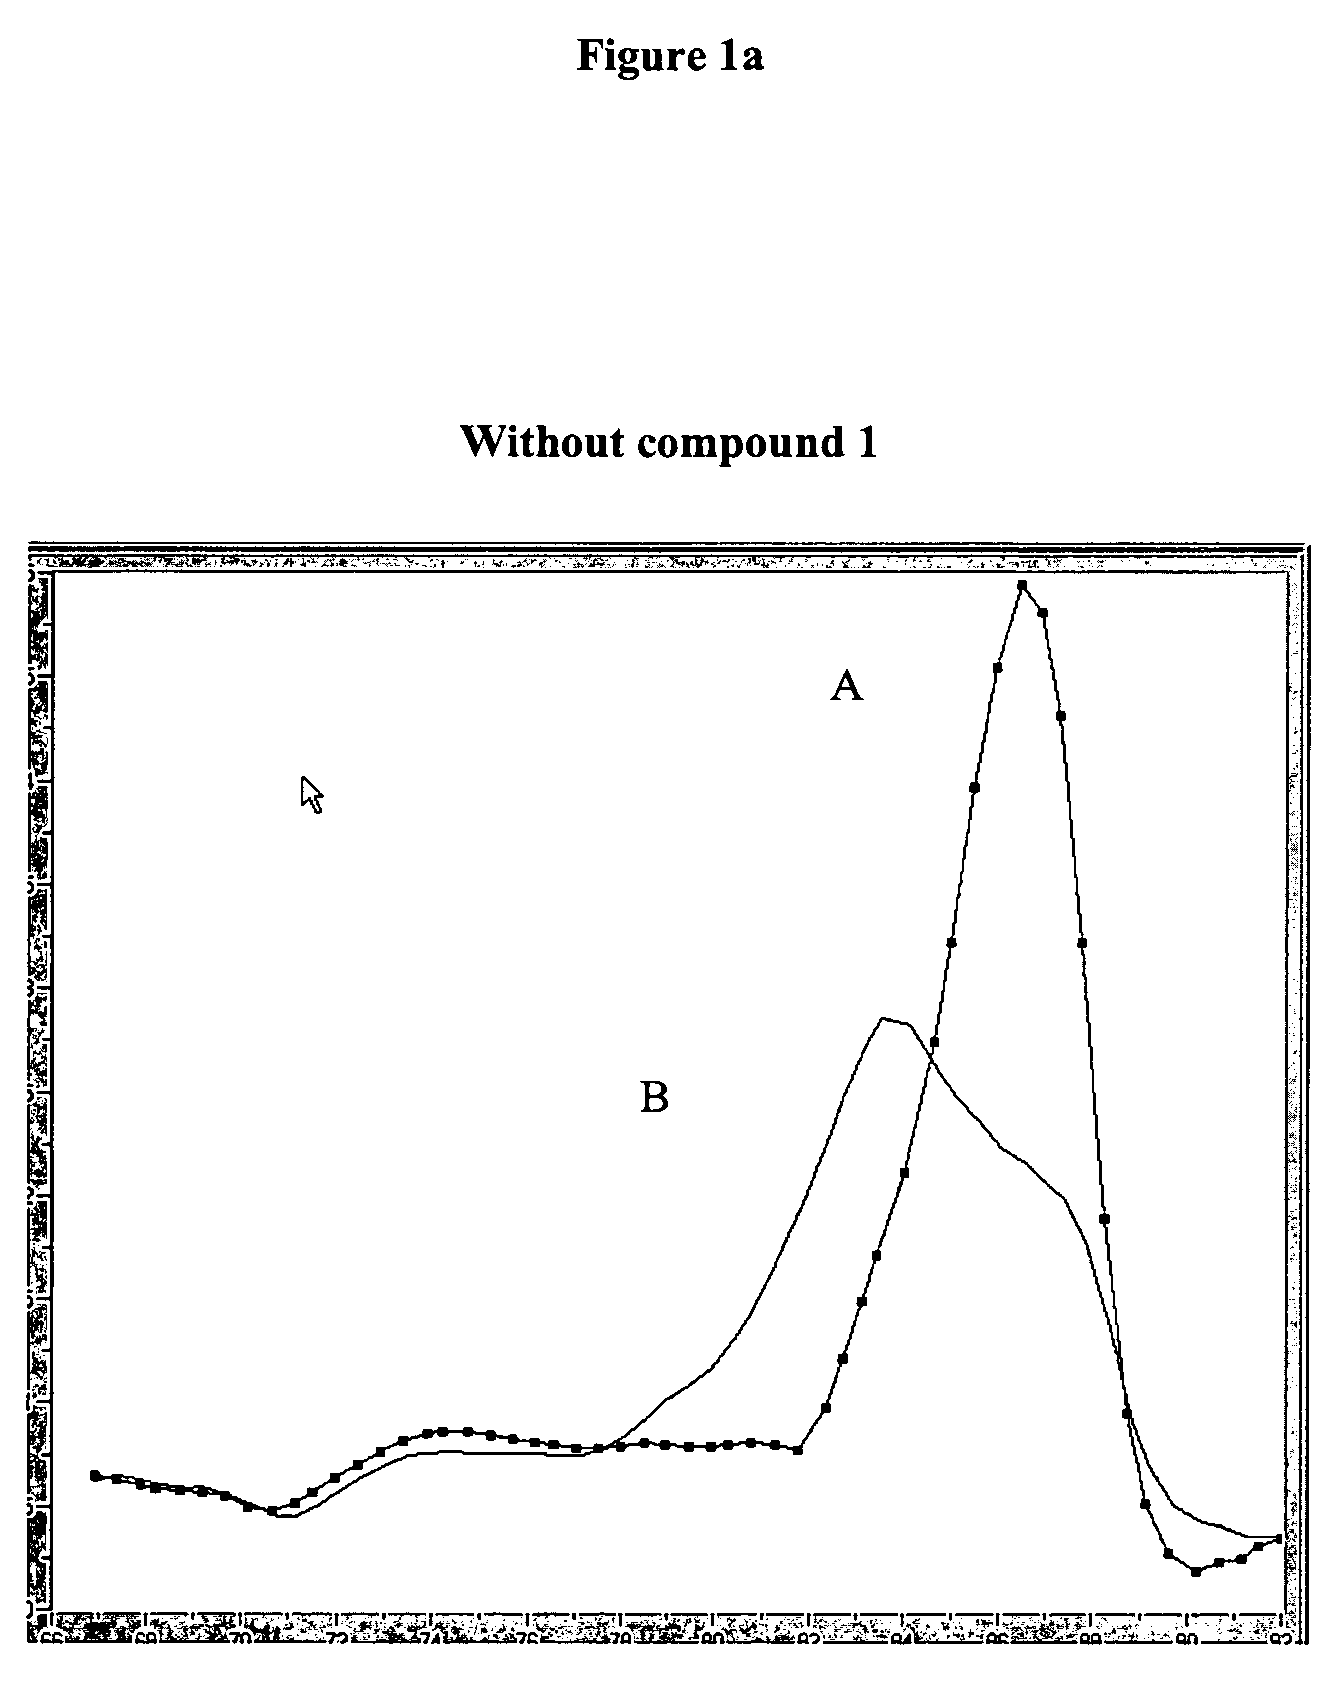 Benzimidazolium compounds and salts of benzimidazolium compounds for nucleic acid amplification